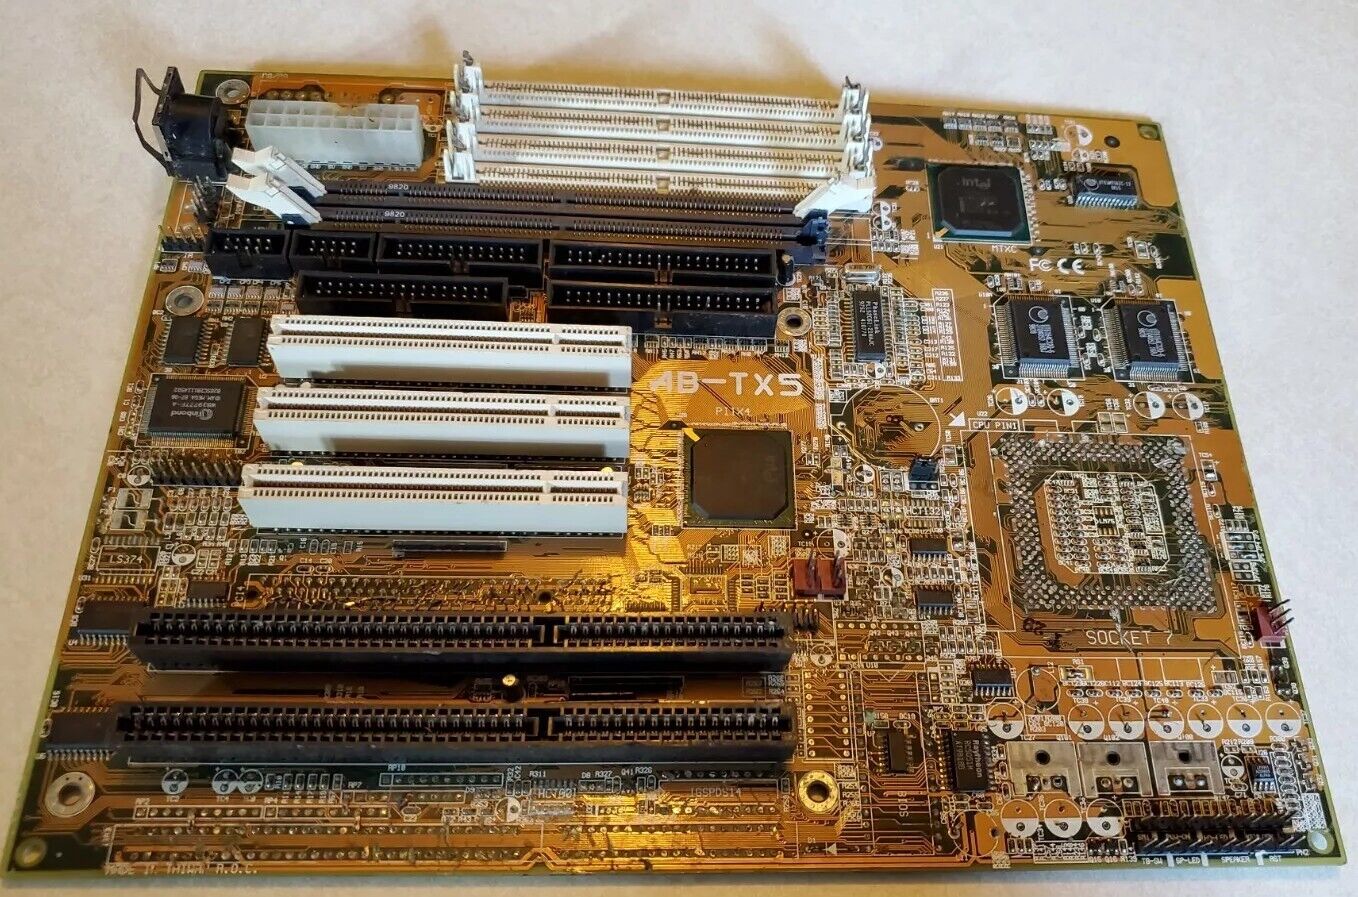 Vintage AB-TX5 Motherboard For Parts